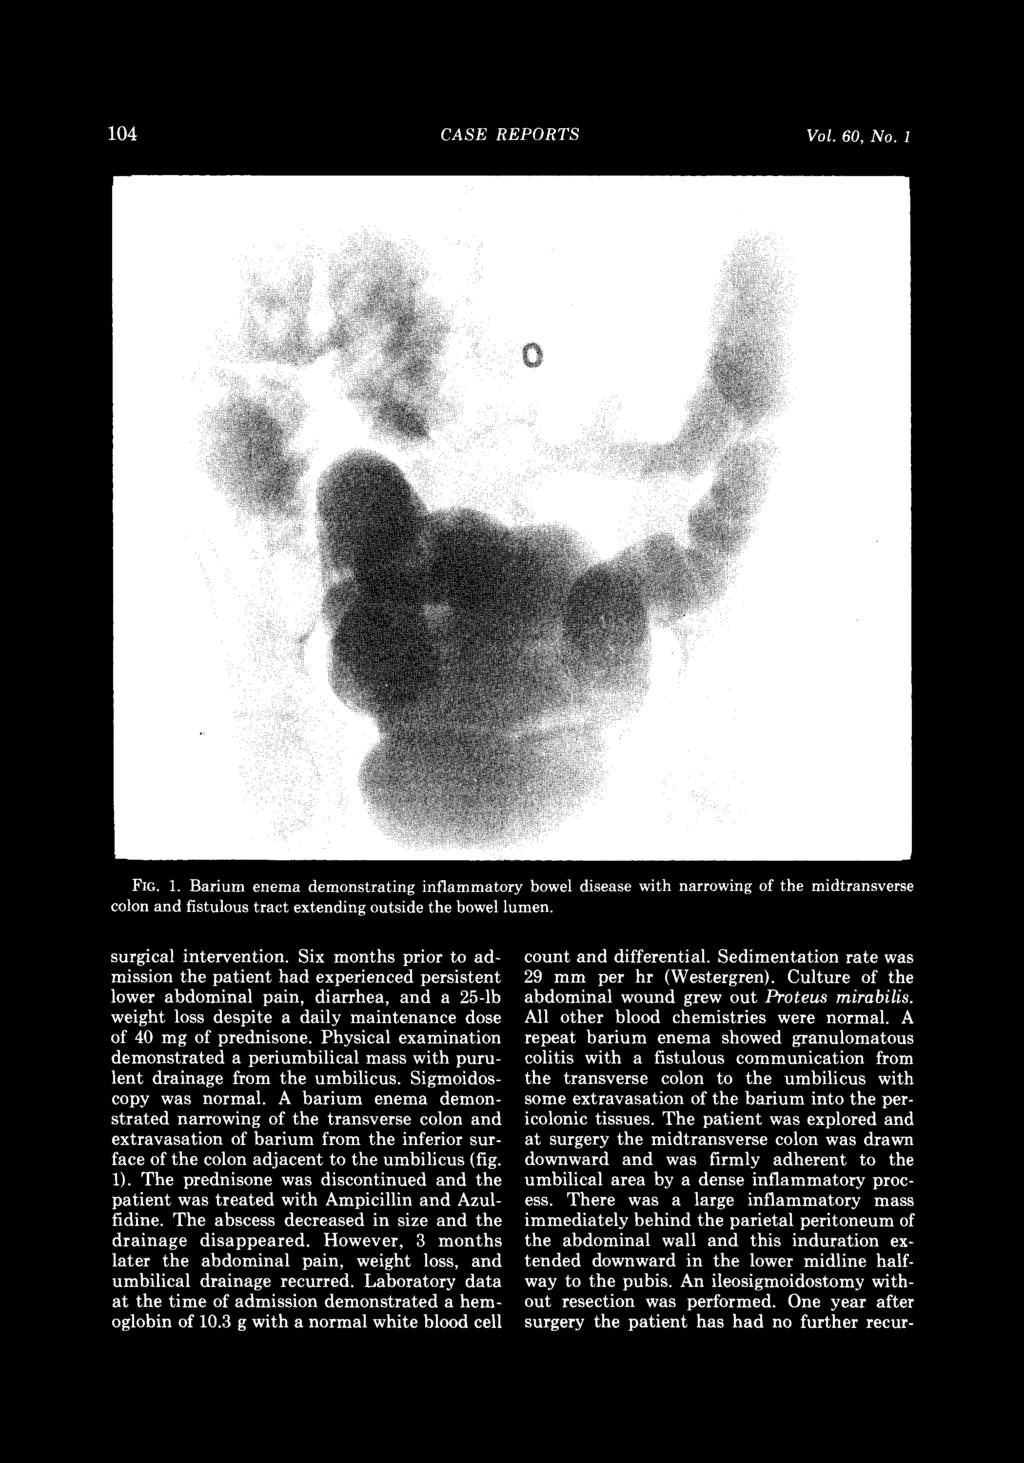 104 CASE REPORTS Vol. 60, No.1 FIG. 1. Barium enema demonstrating inflammatory bowel disease with narrowing of the midtransverse colon and fistulous tract extending outside the bowel lumen.